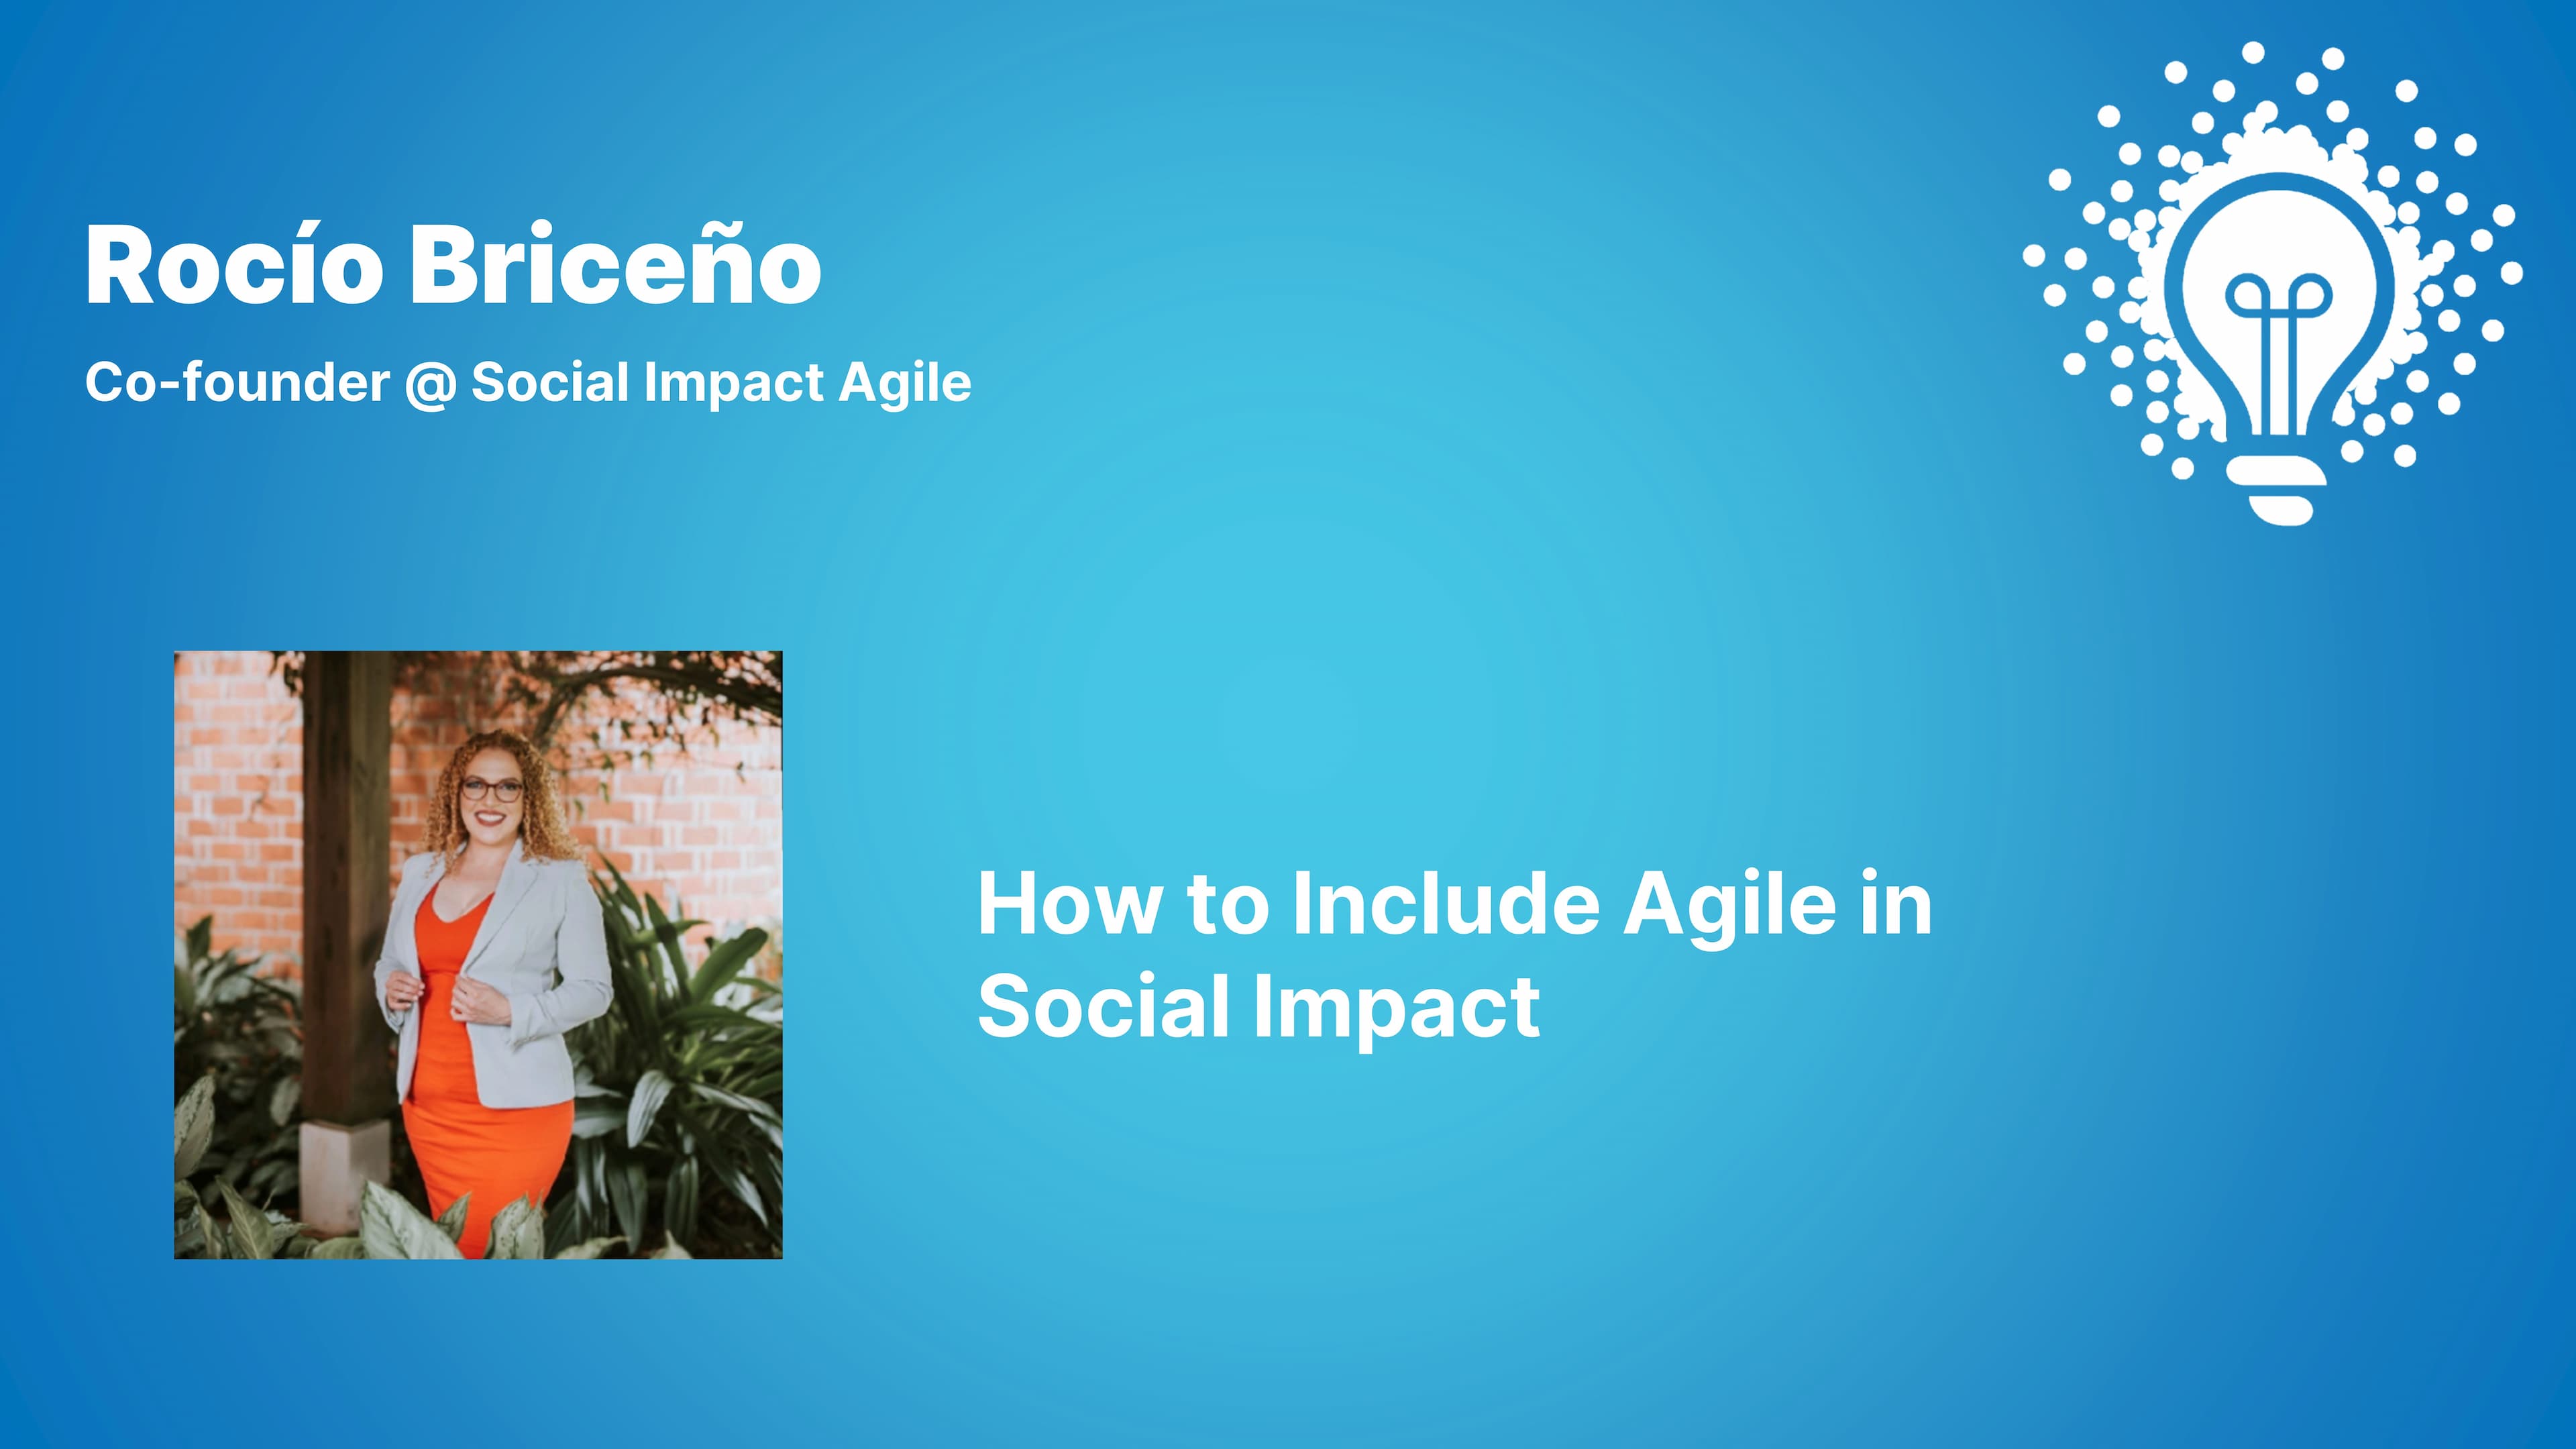 SiAgile: The way to include agile in Social Impact